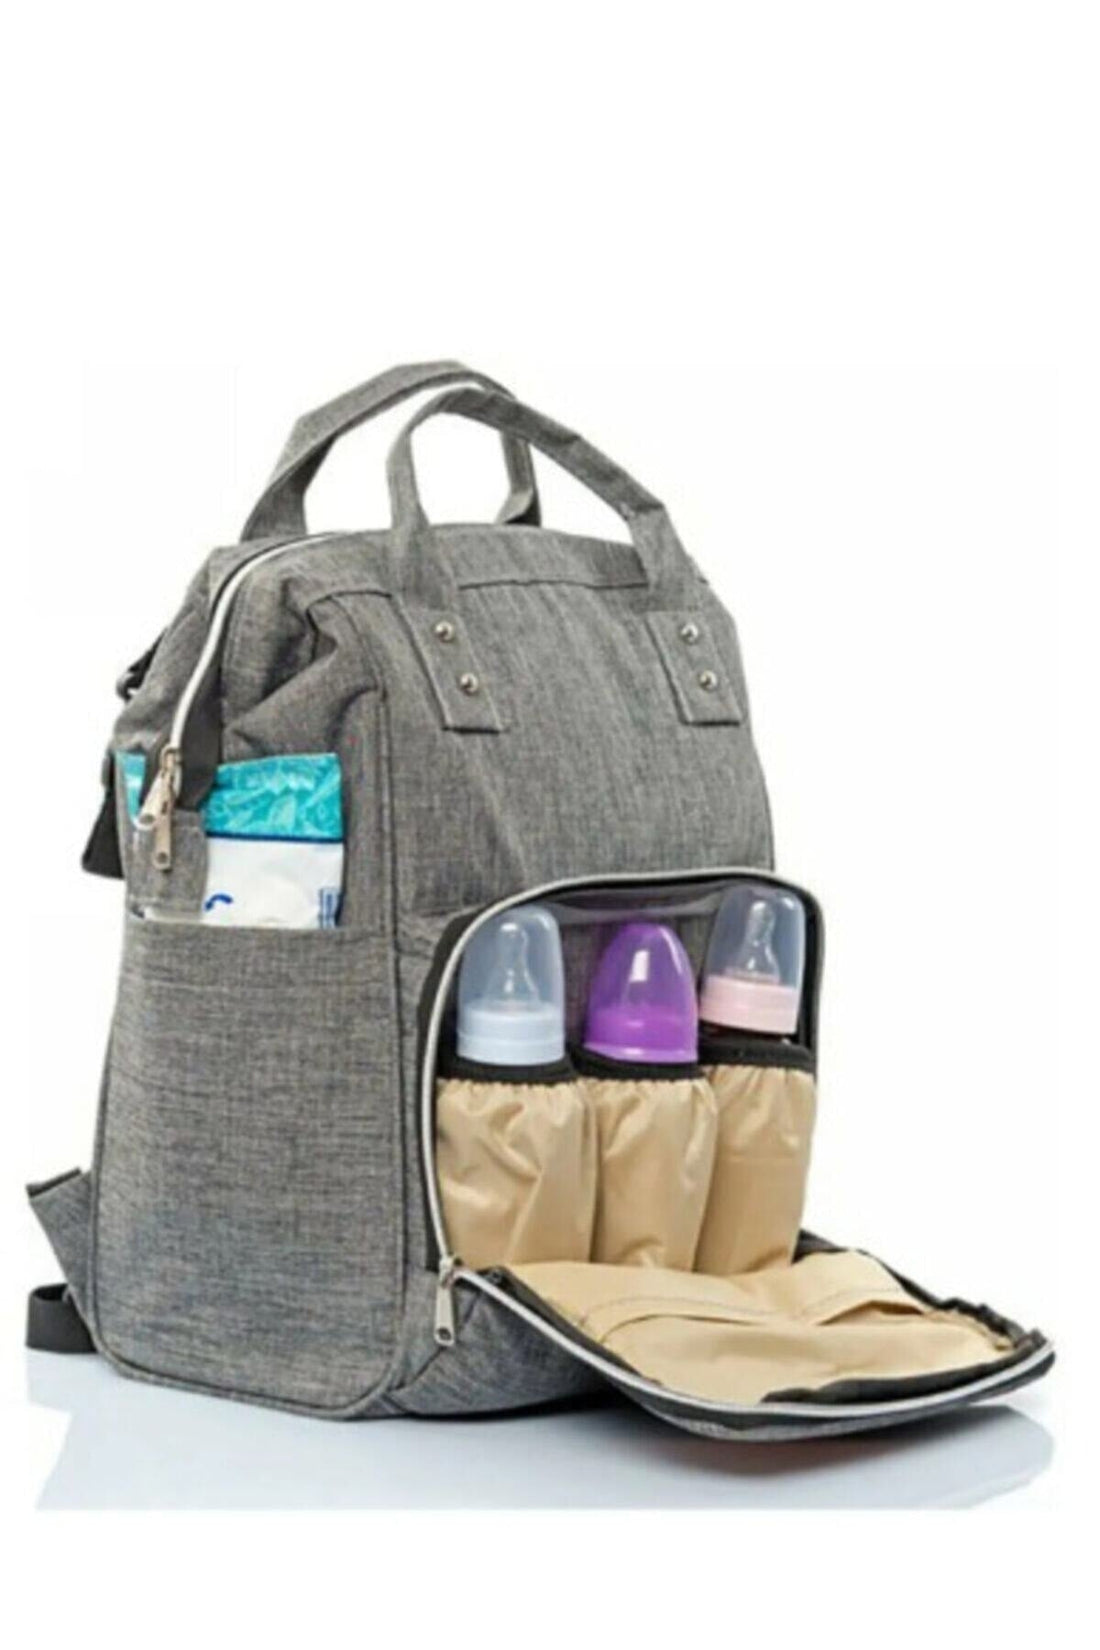 26-Mother Baby Care Backpack Gray (New)